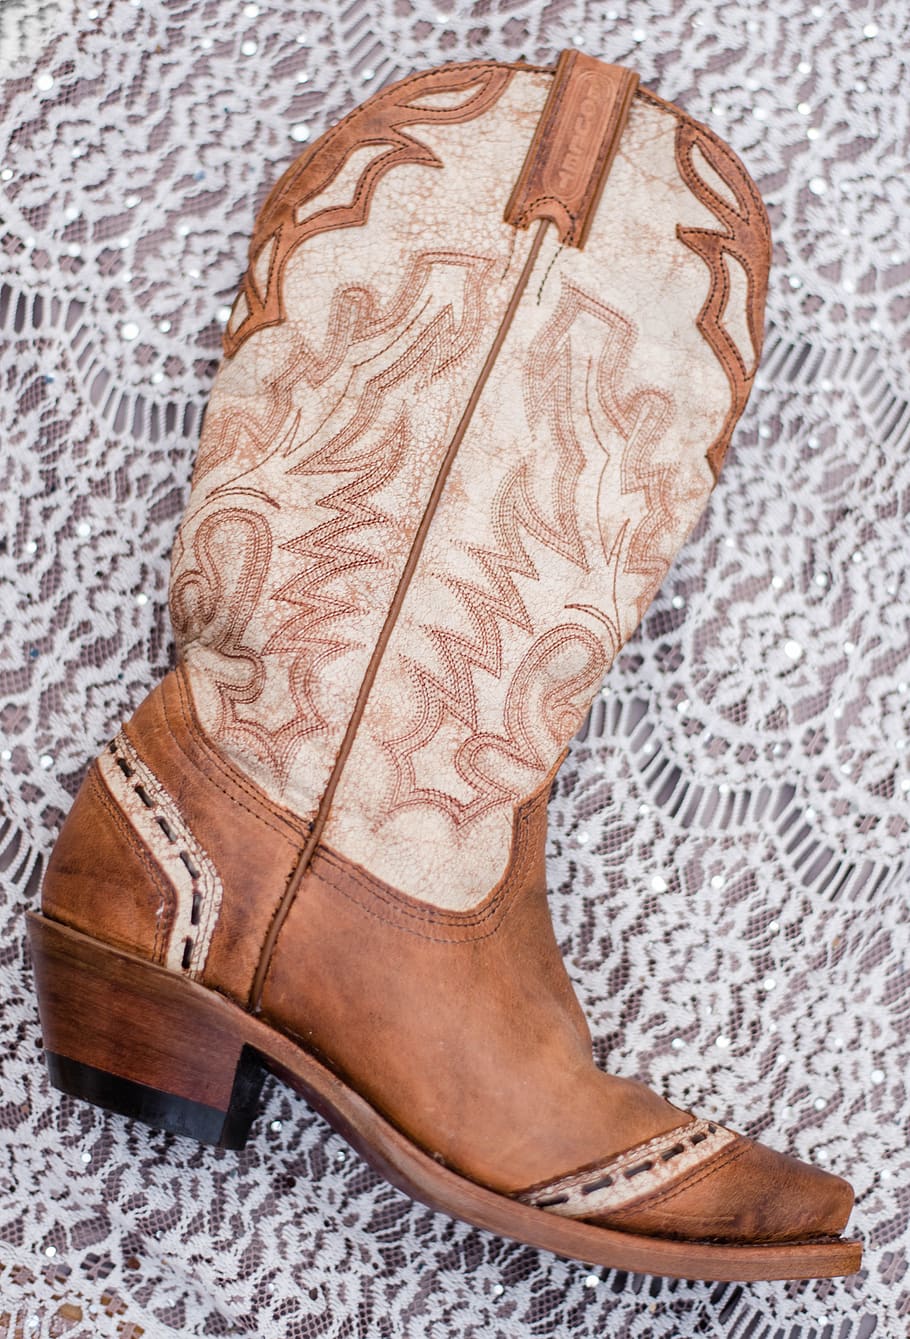 cowboy boots, boots, cowboy, western, cowgirl, country, cowboys, country girl, country music, shoes